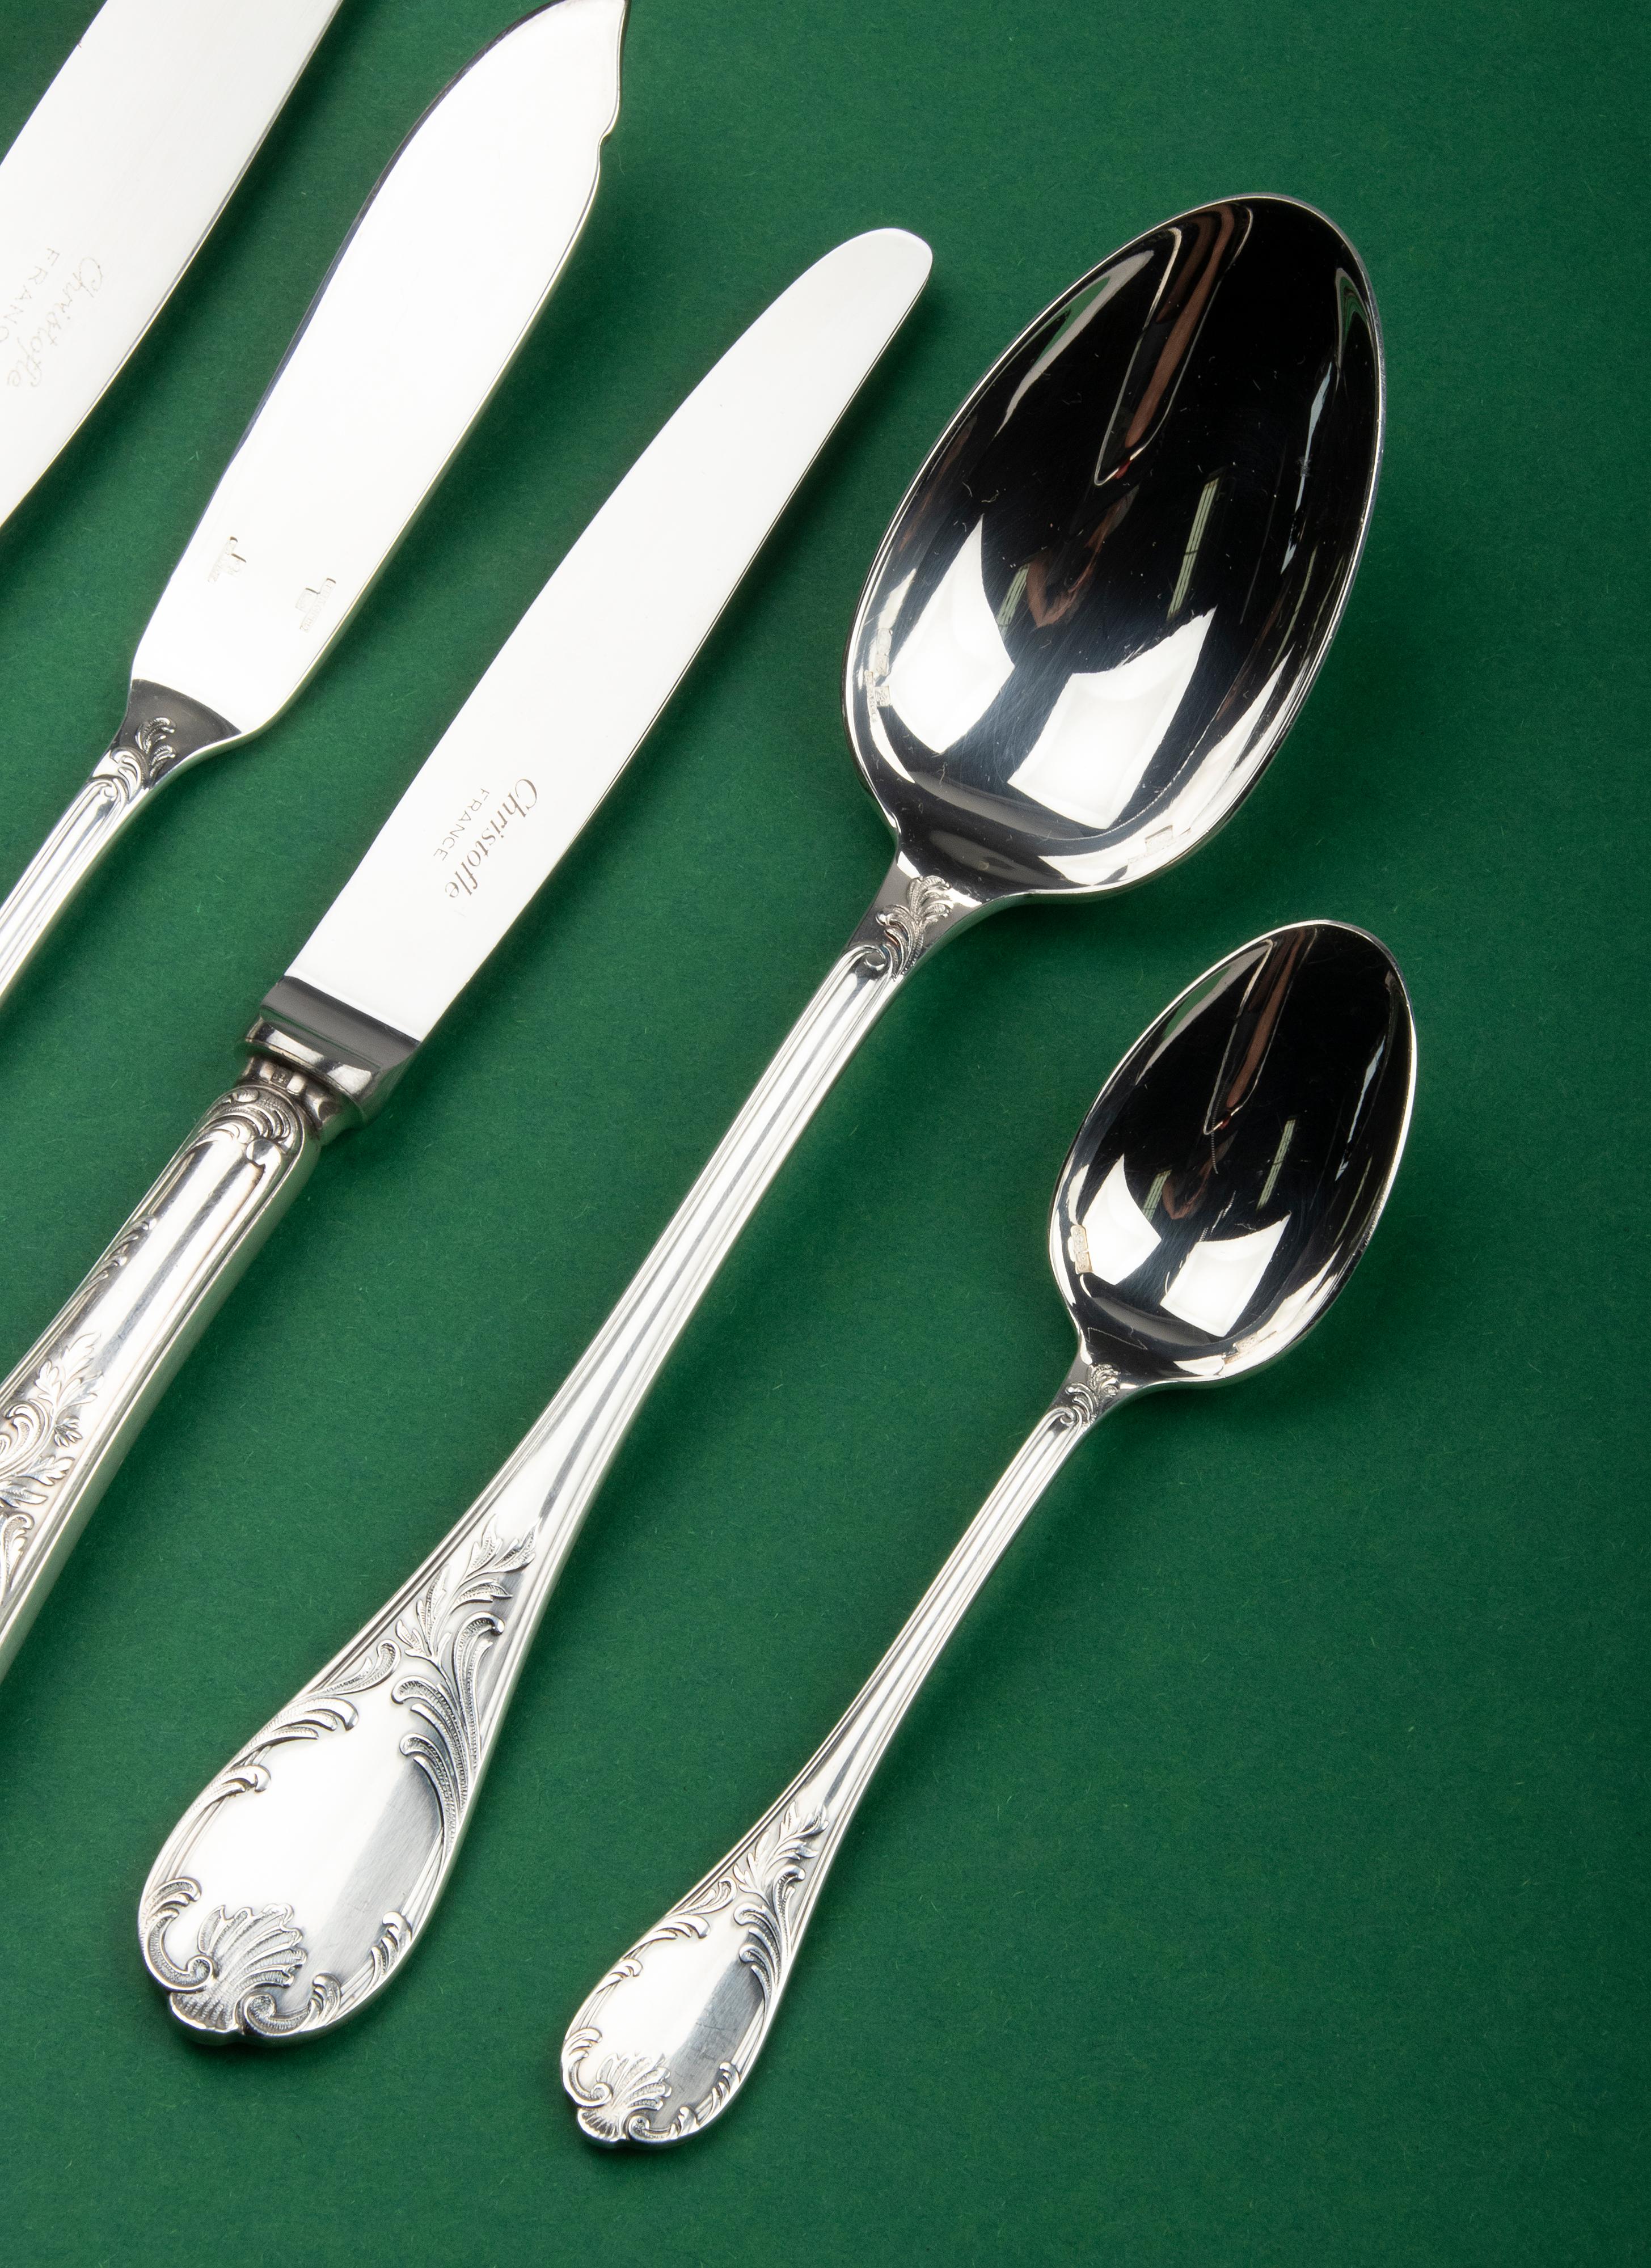 Louis XV 48-Piece Set of Silver Plated Flatware for 6 Persons by Christofle Model Marly